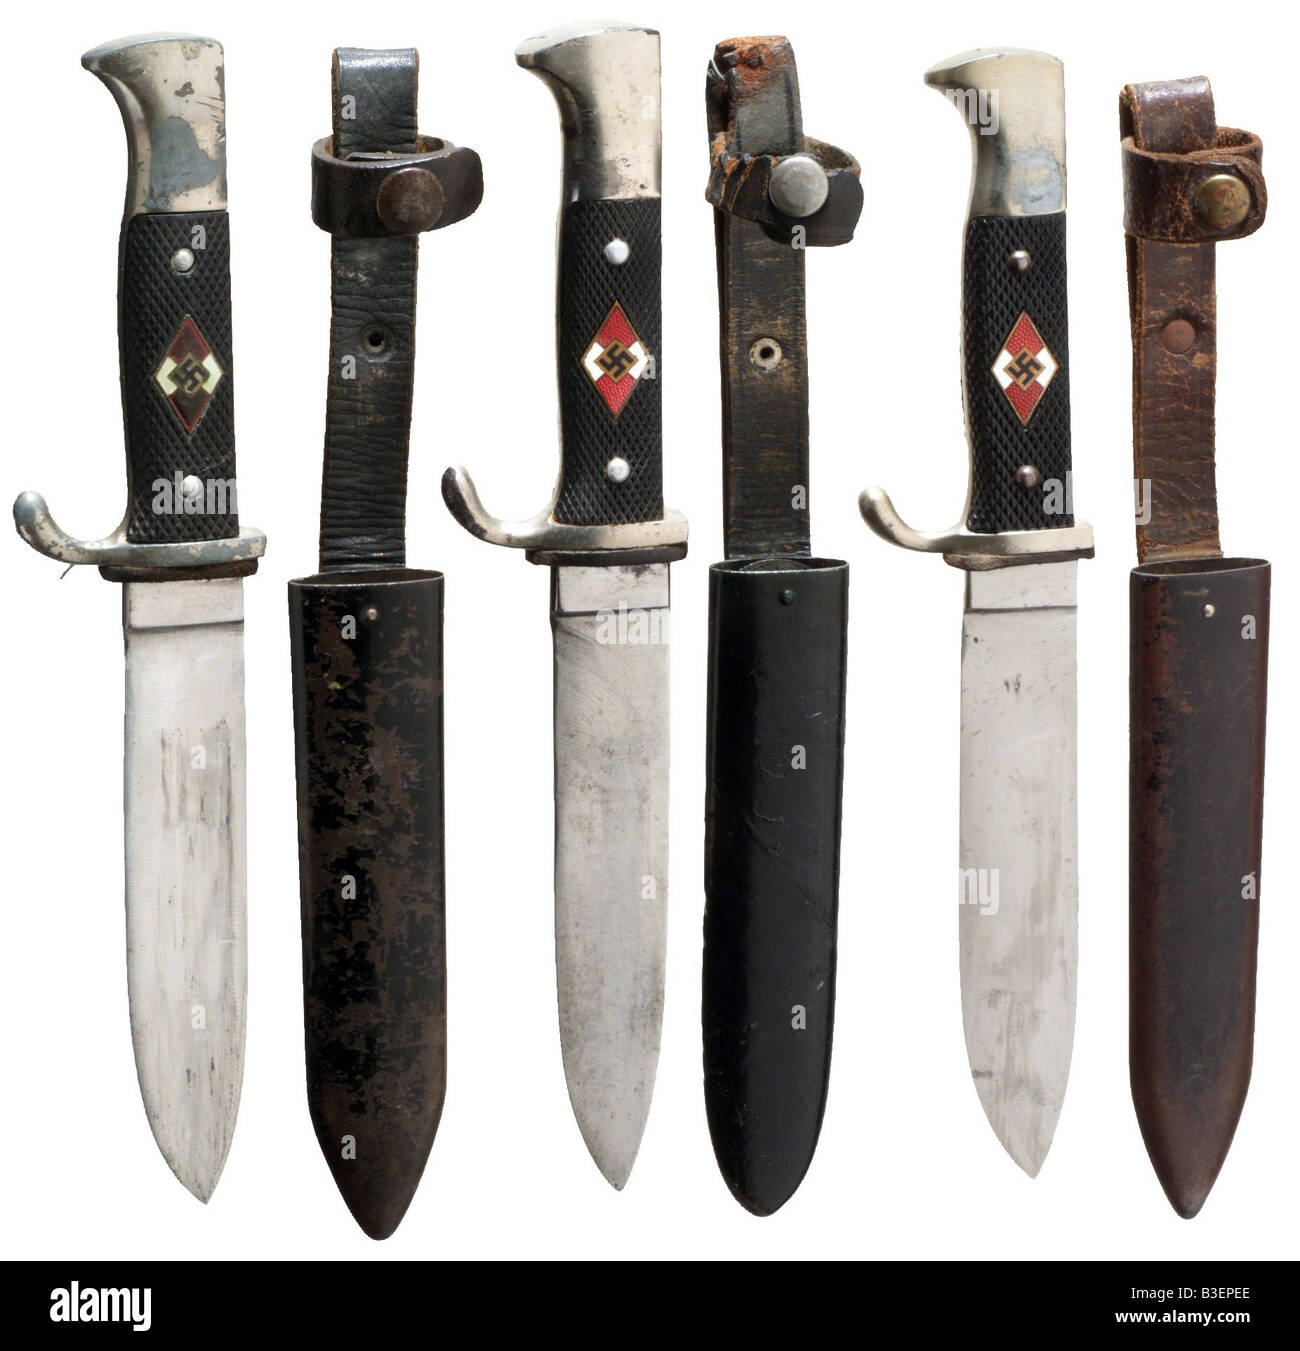 weapons/arms, thrustings, knives, steath knvies of the Hitler Youth, Nazi Germany, 1930s, Stock Photo